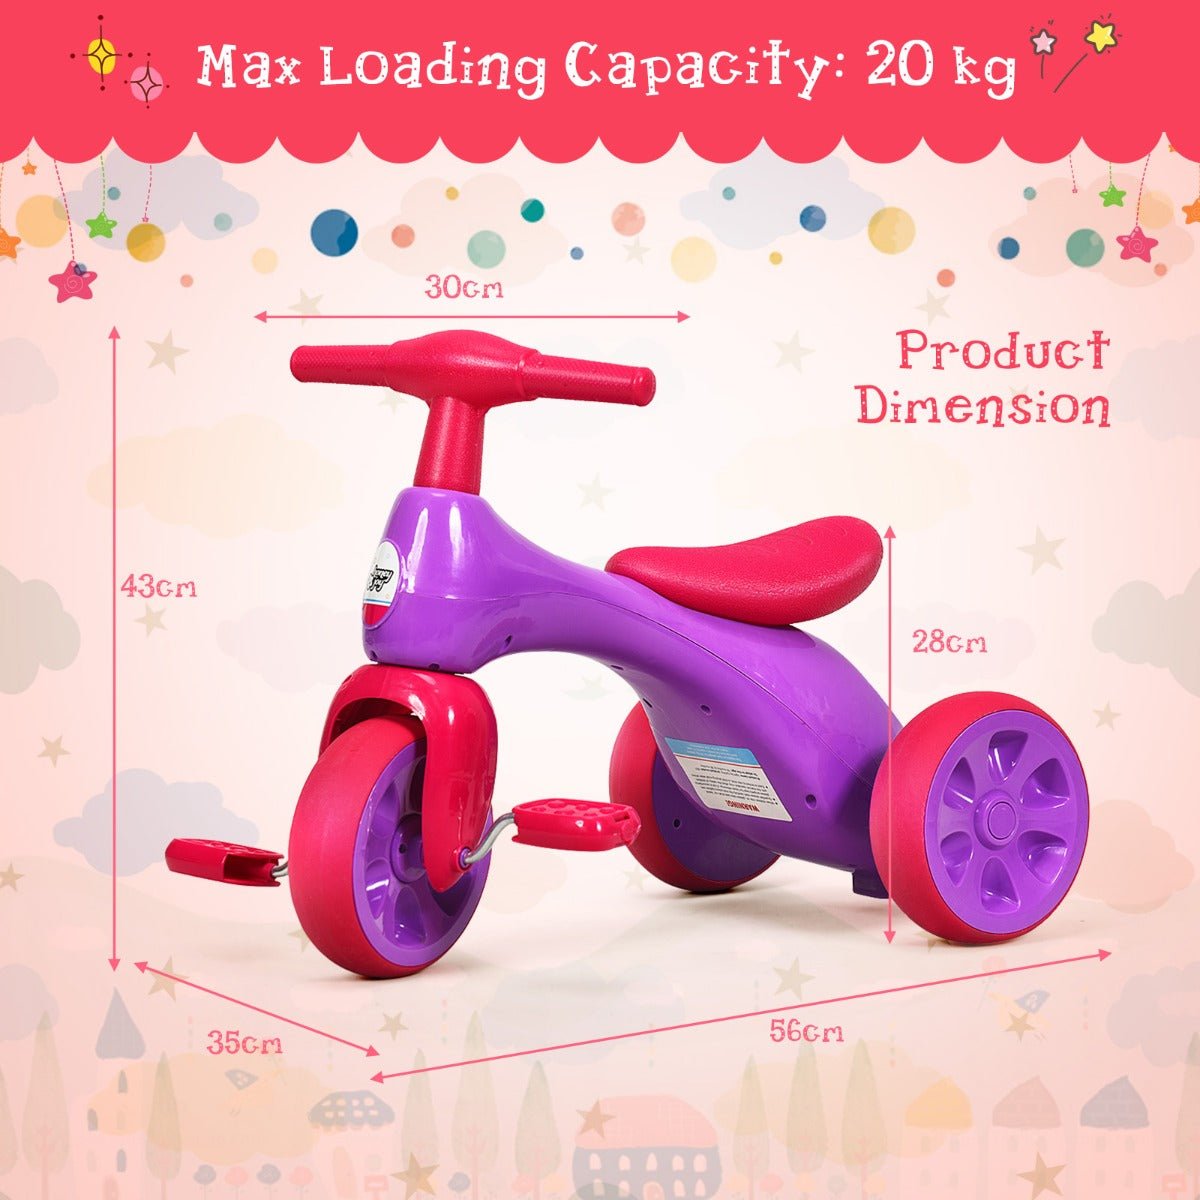 Growing with Joy: Pink Foot Pedal Tricycle for Toddler's Outdoor Play